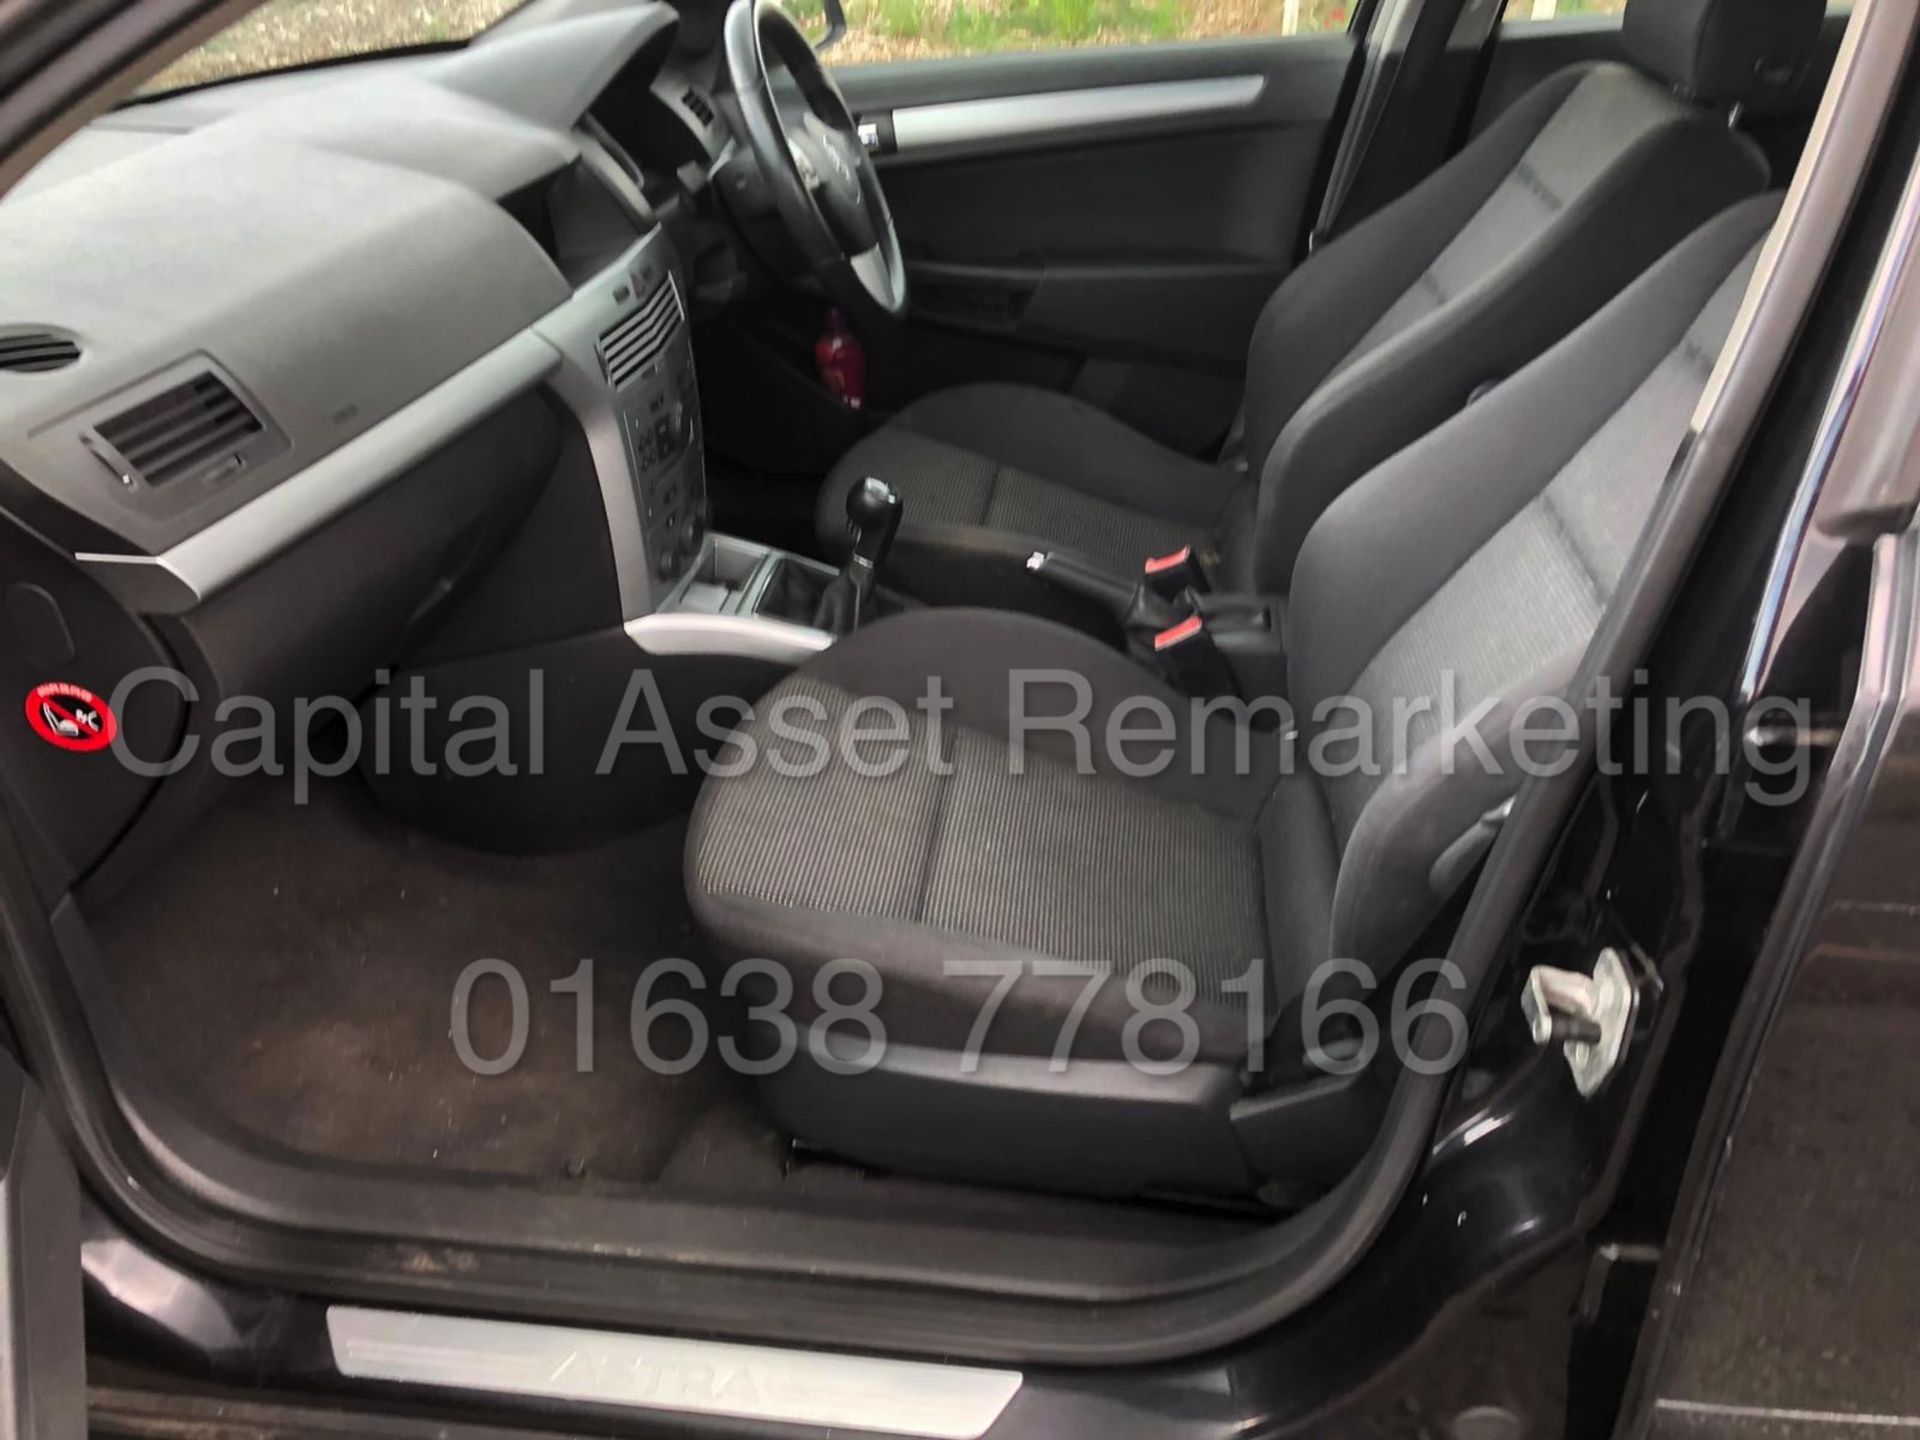 On Sale VAUXHALL ASTRA *SXI TWINPORT* HATCHBACK (2007) '1.4 PETROL' *AIR CON* (NO VAT) - Image 11 of 16